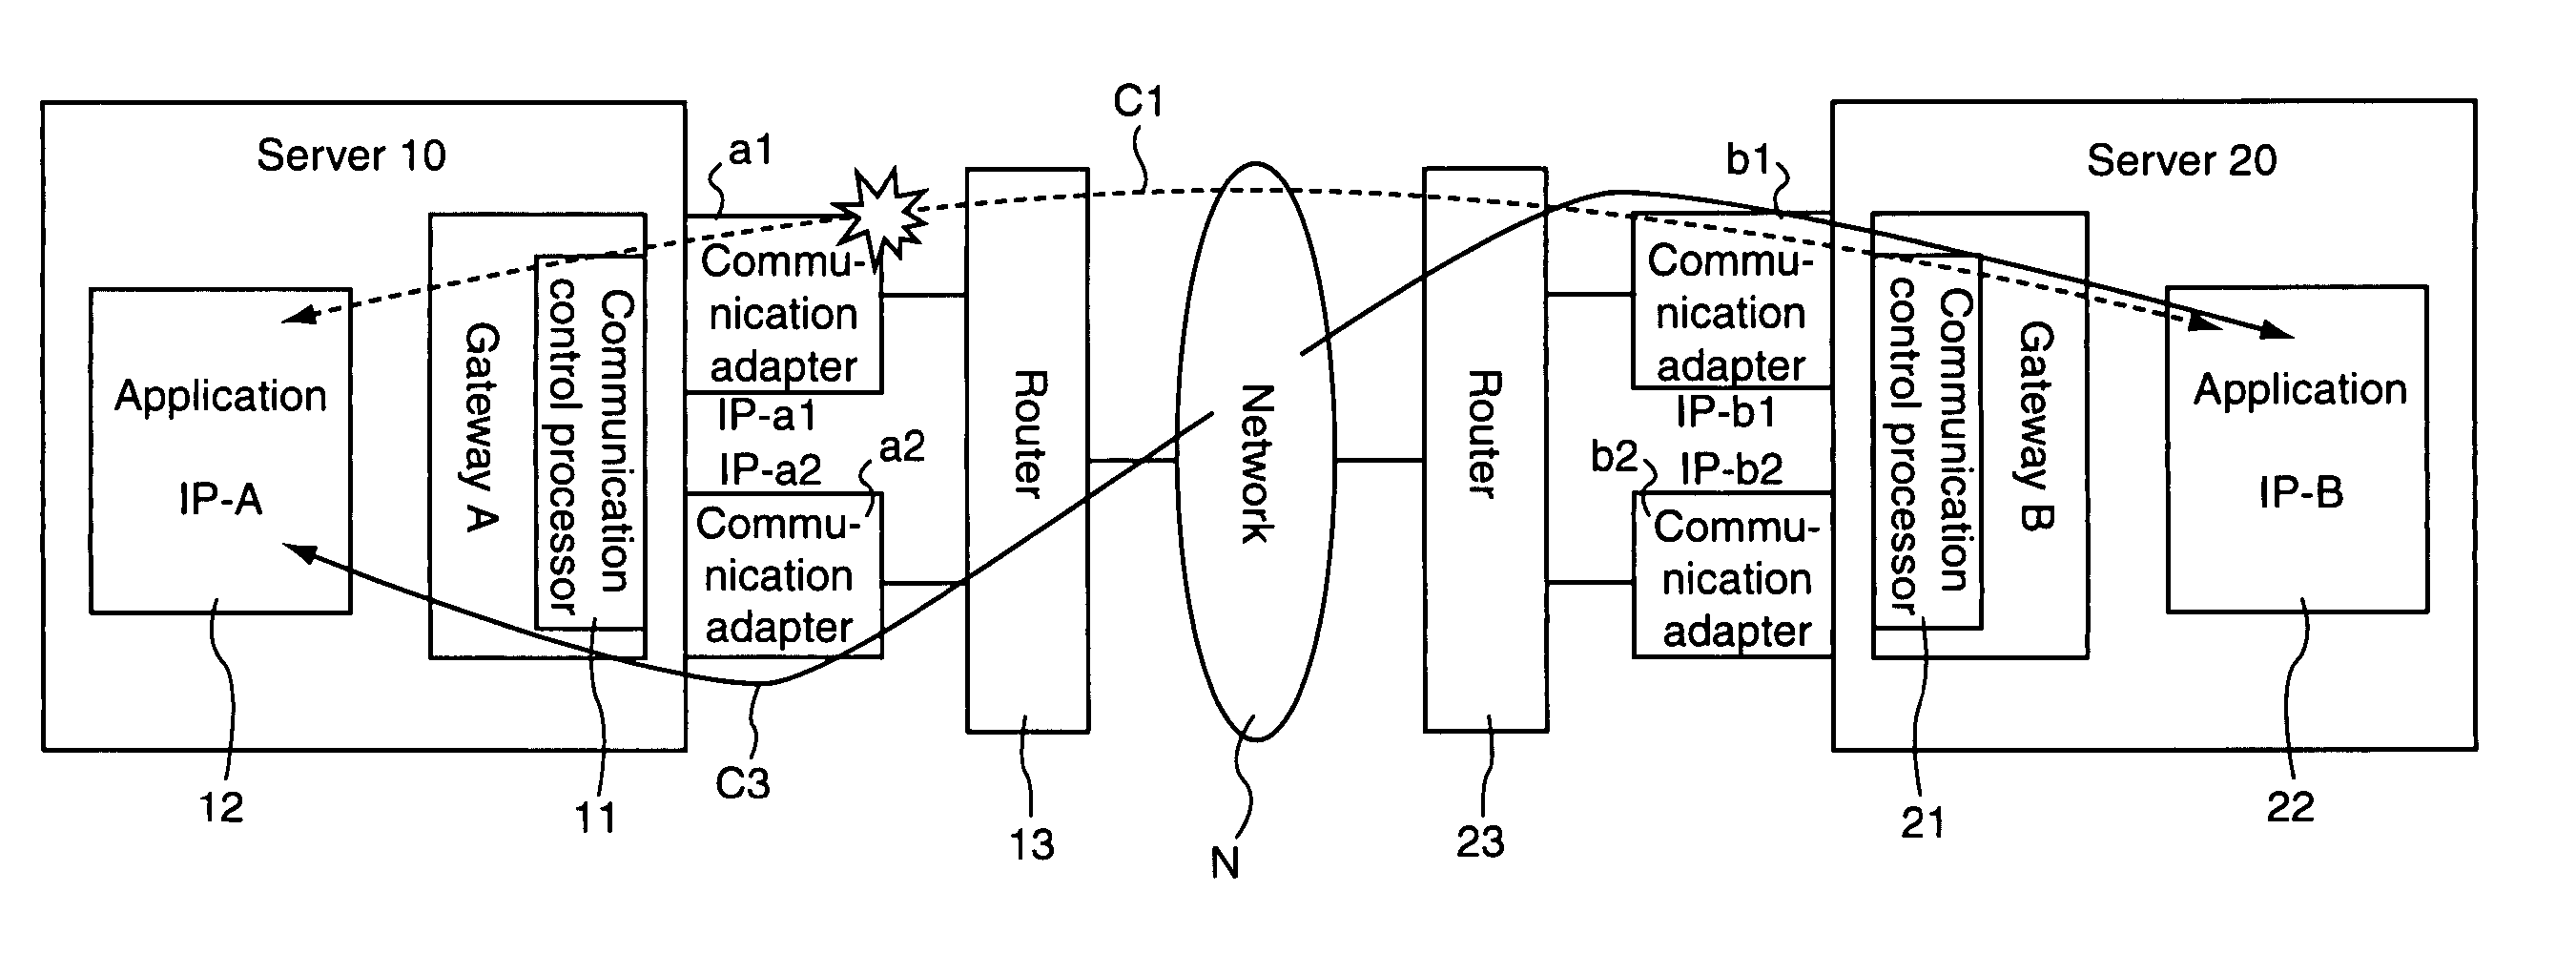 Communication path control program and communication path control device in computer network system